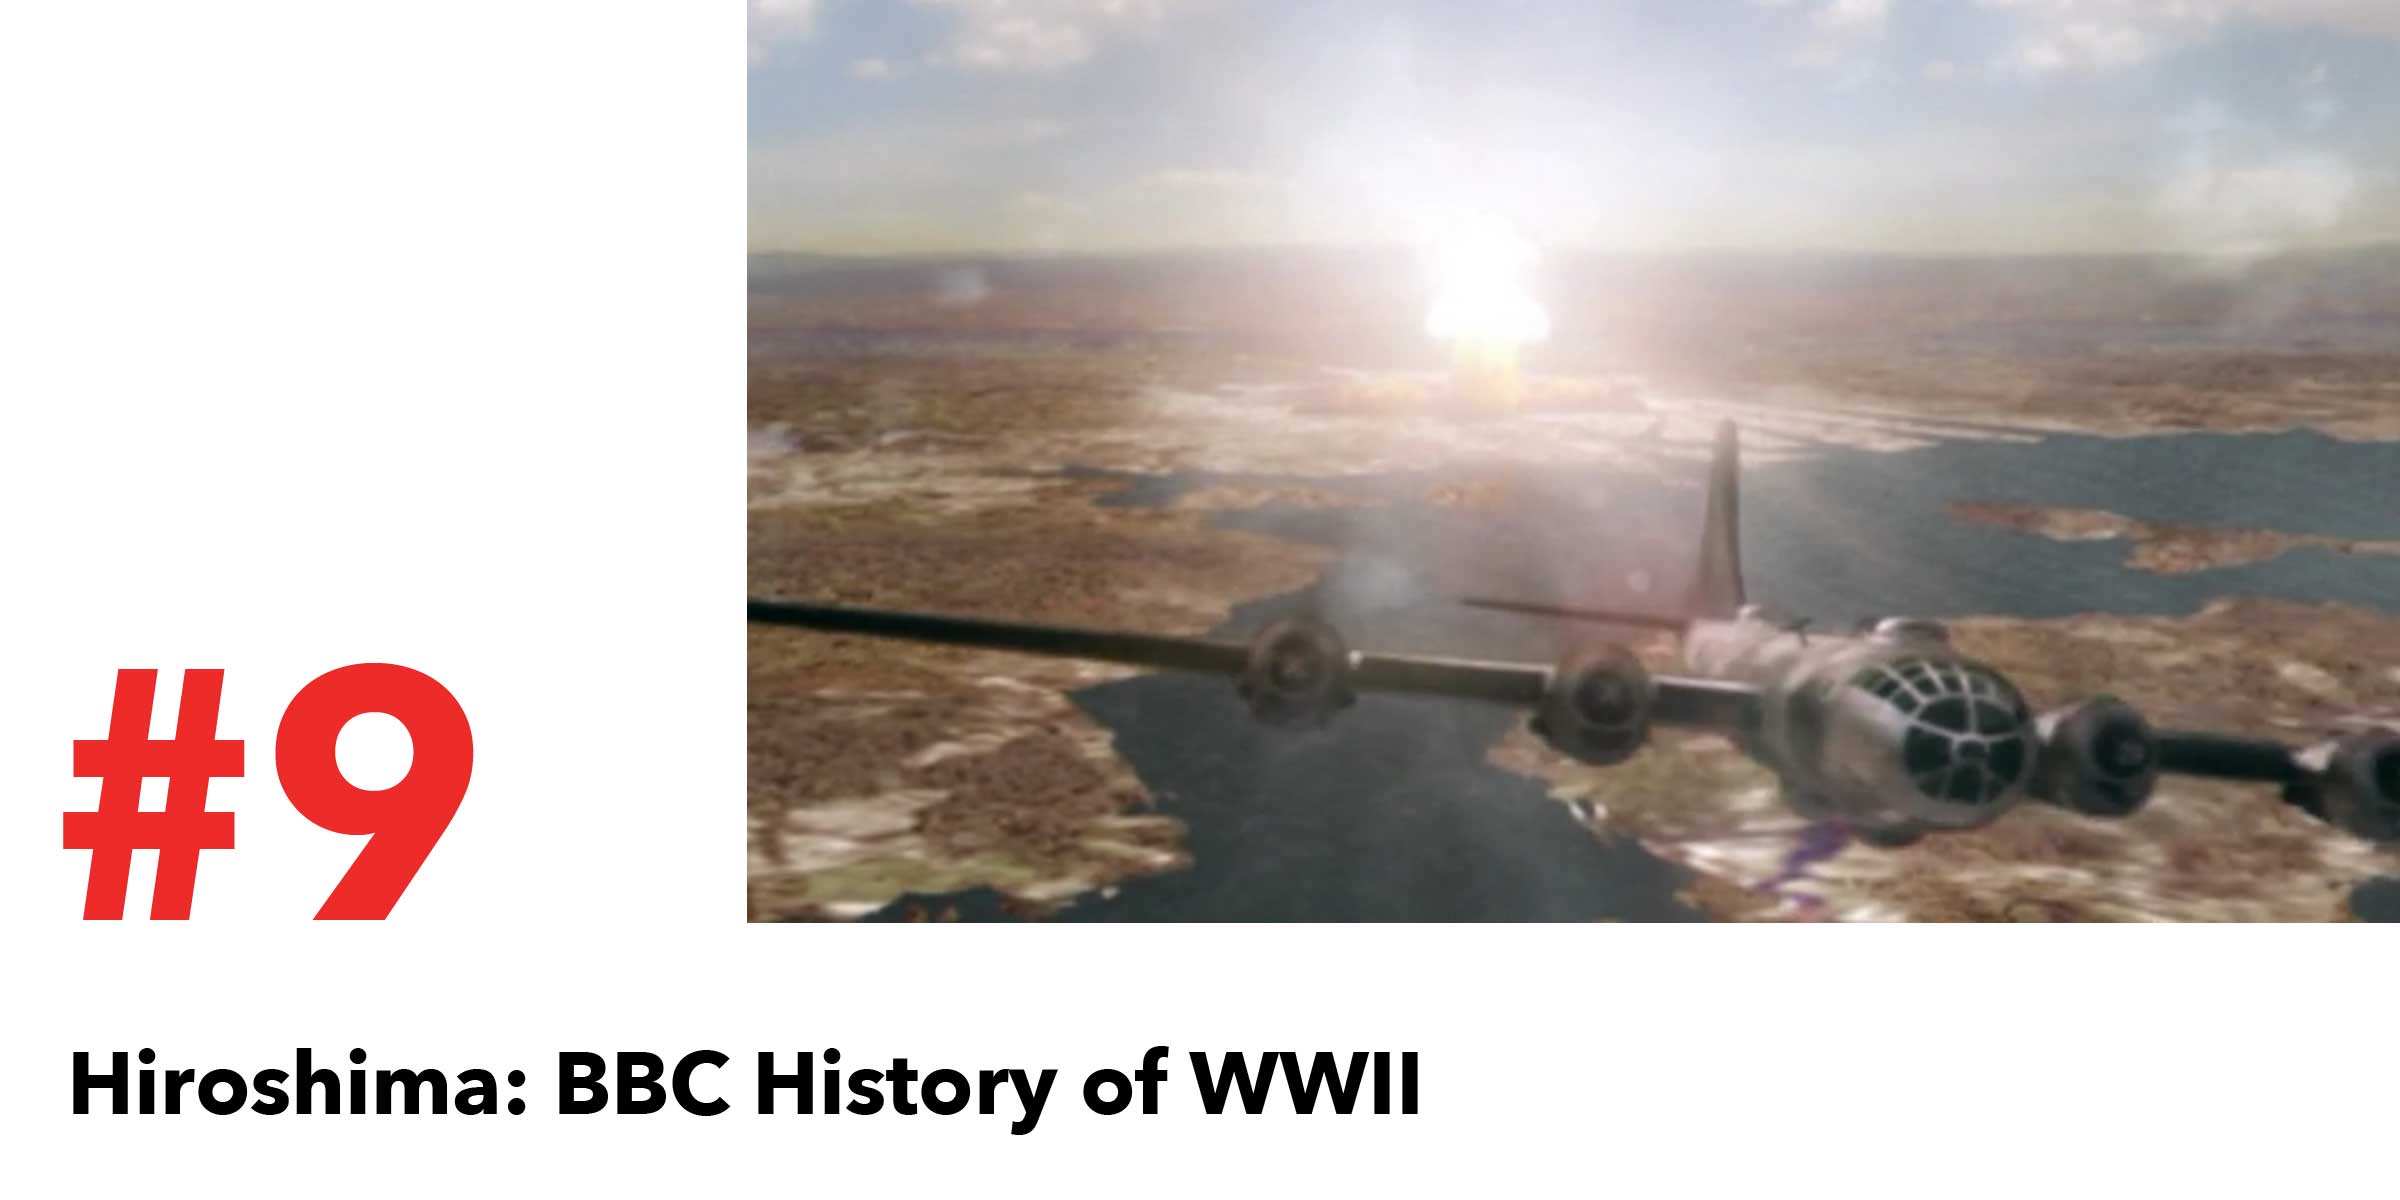 Hiroshima: BBC History of WWII is #9 in the Top 10 Post Apocalyptic Movies on Netflix. Pictured, a bomber plane flies away as a nuclear atom bomb explodes in the distance.